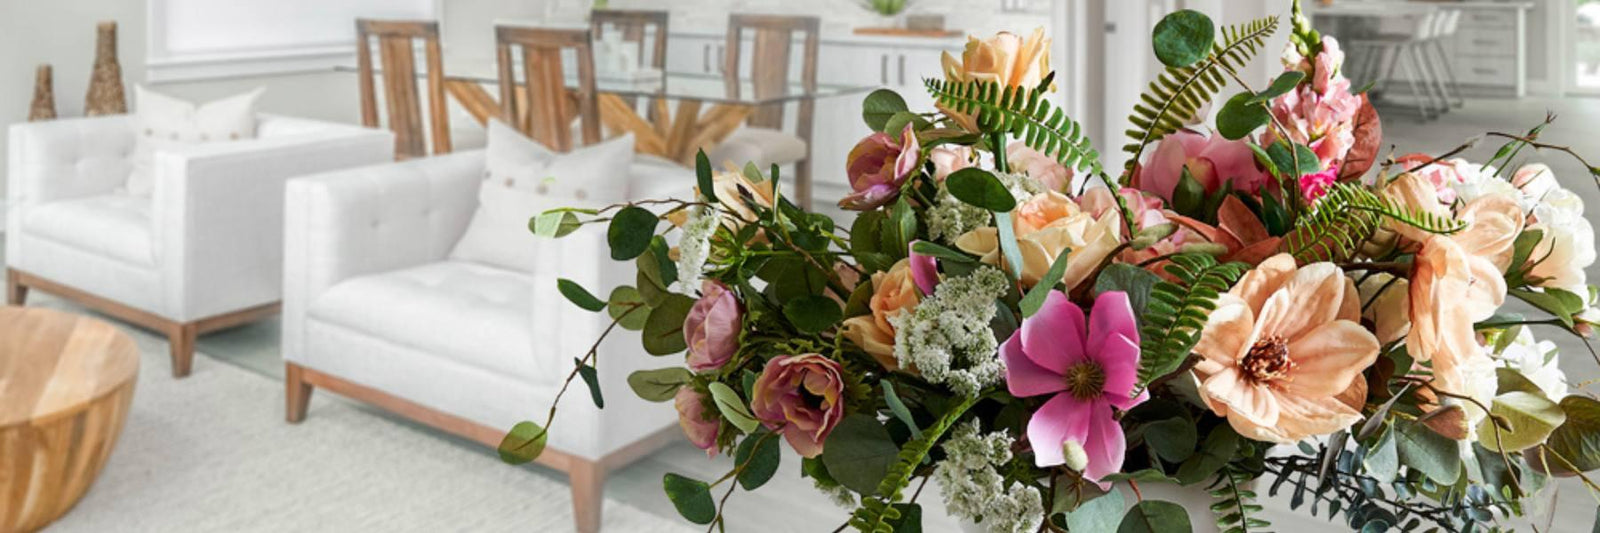 Simply Sublime Events - Wedding Flowers Hope Forest